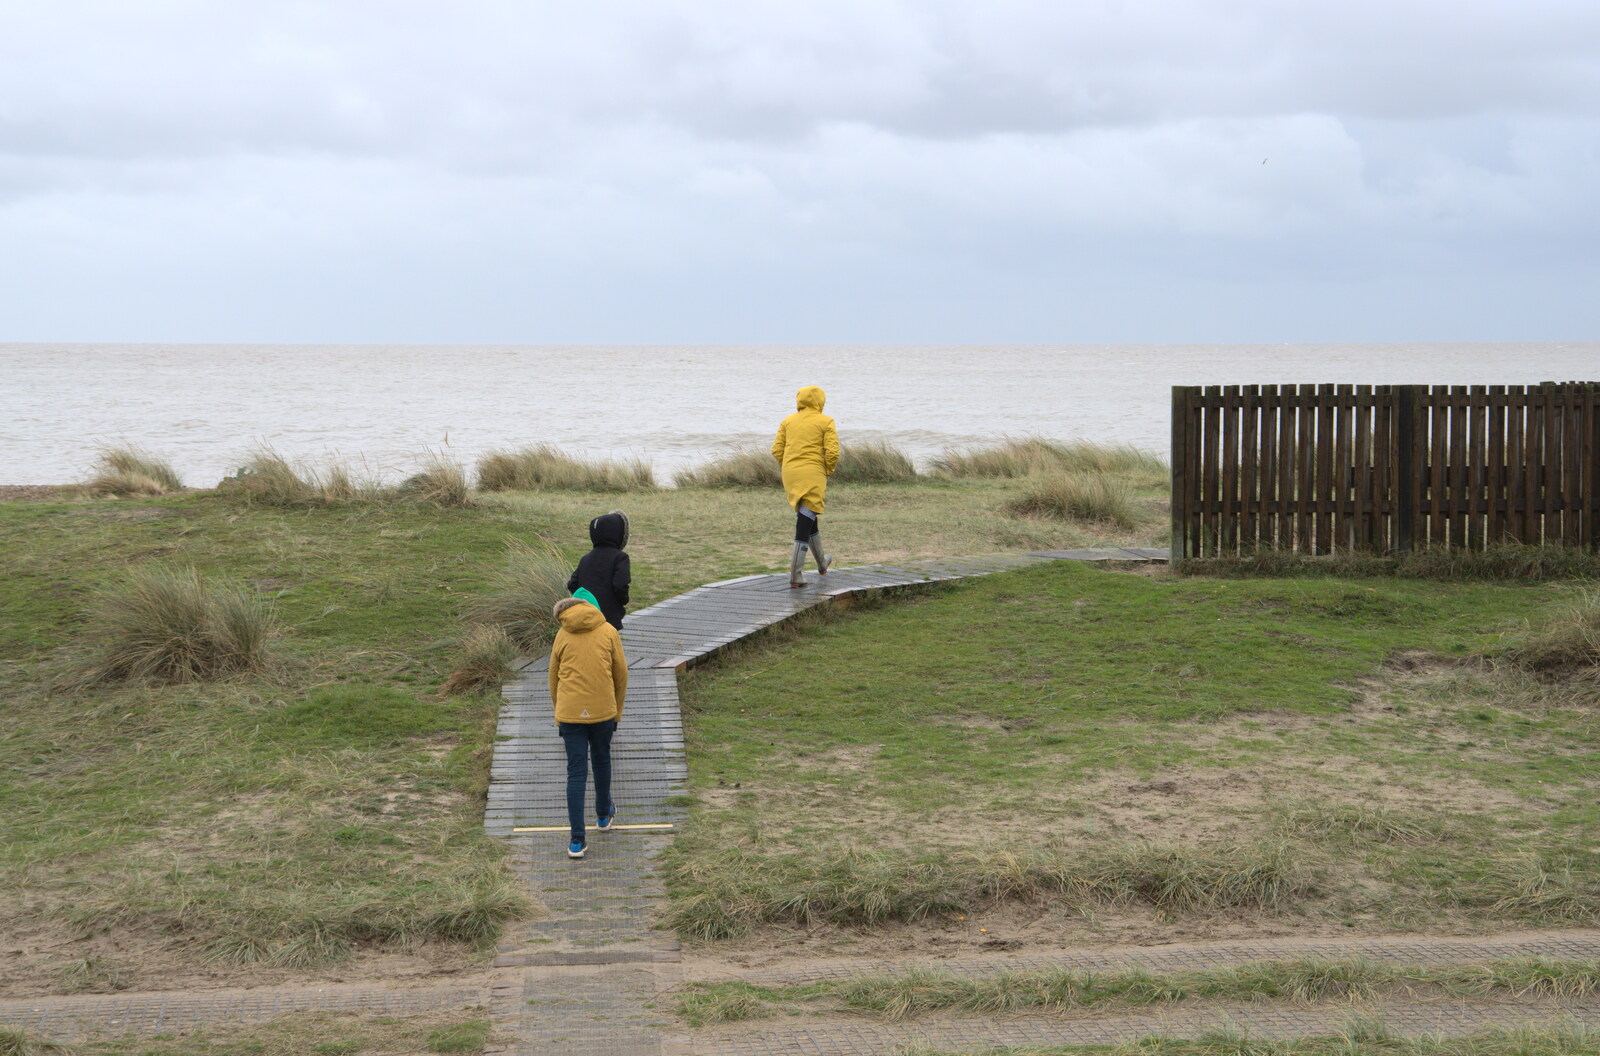 On the boardwalk from Sizewell Beach and the Lion Pub, Sizewell and Theberton, Suffolk - 4th October 2020